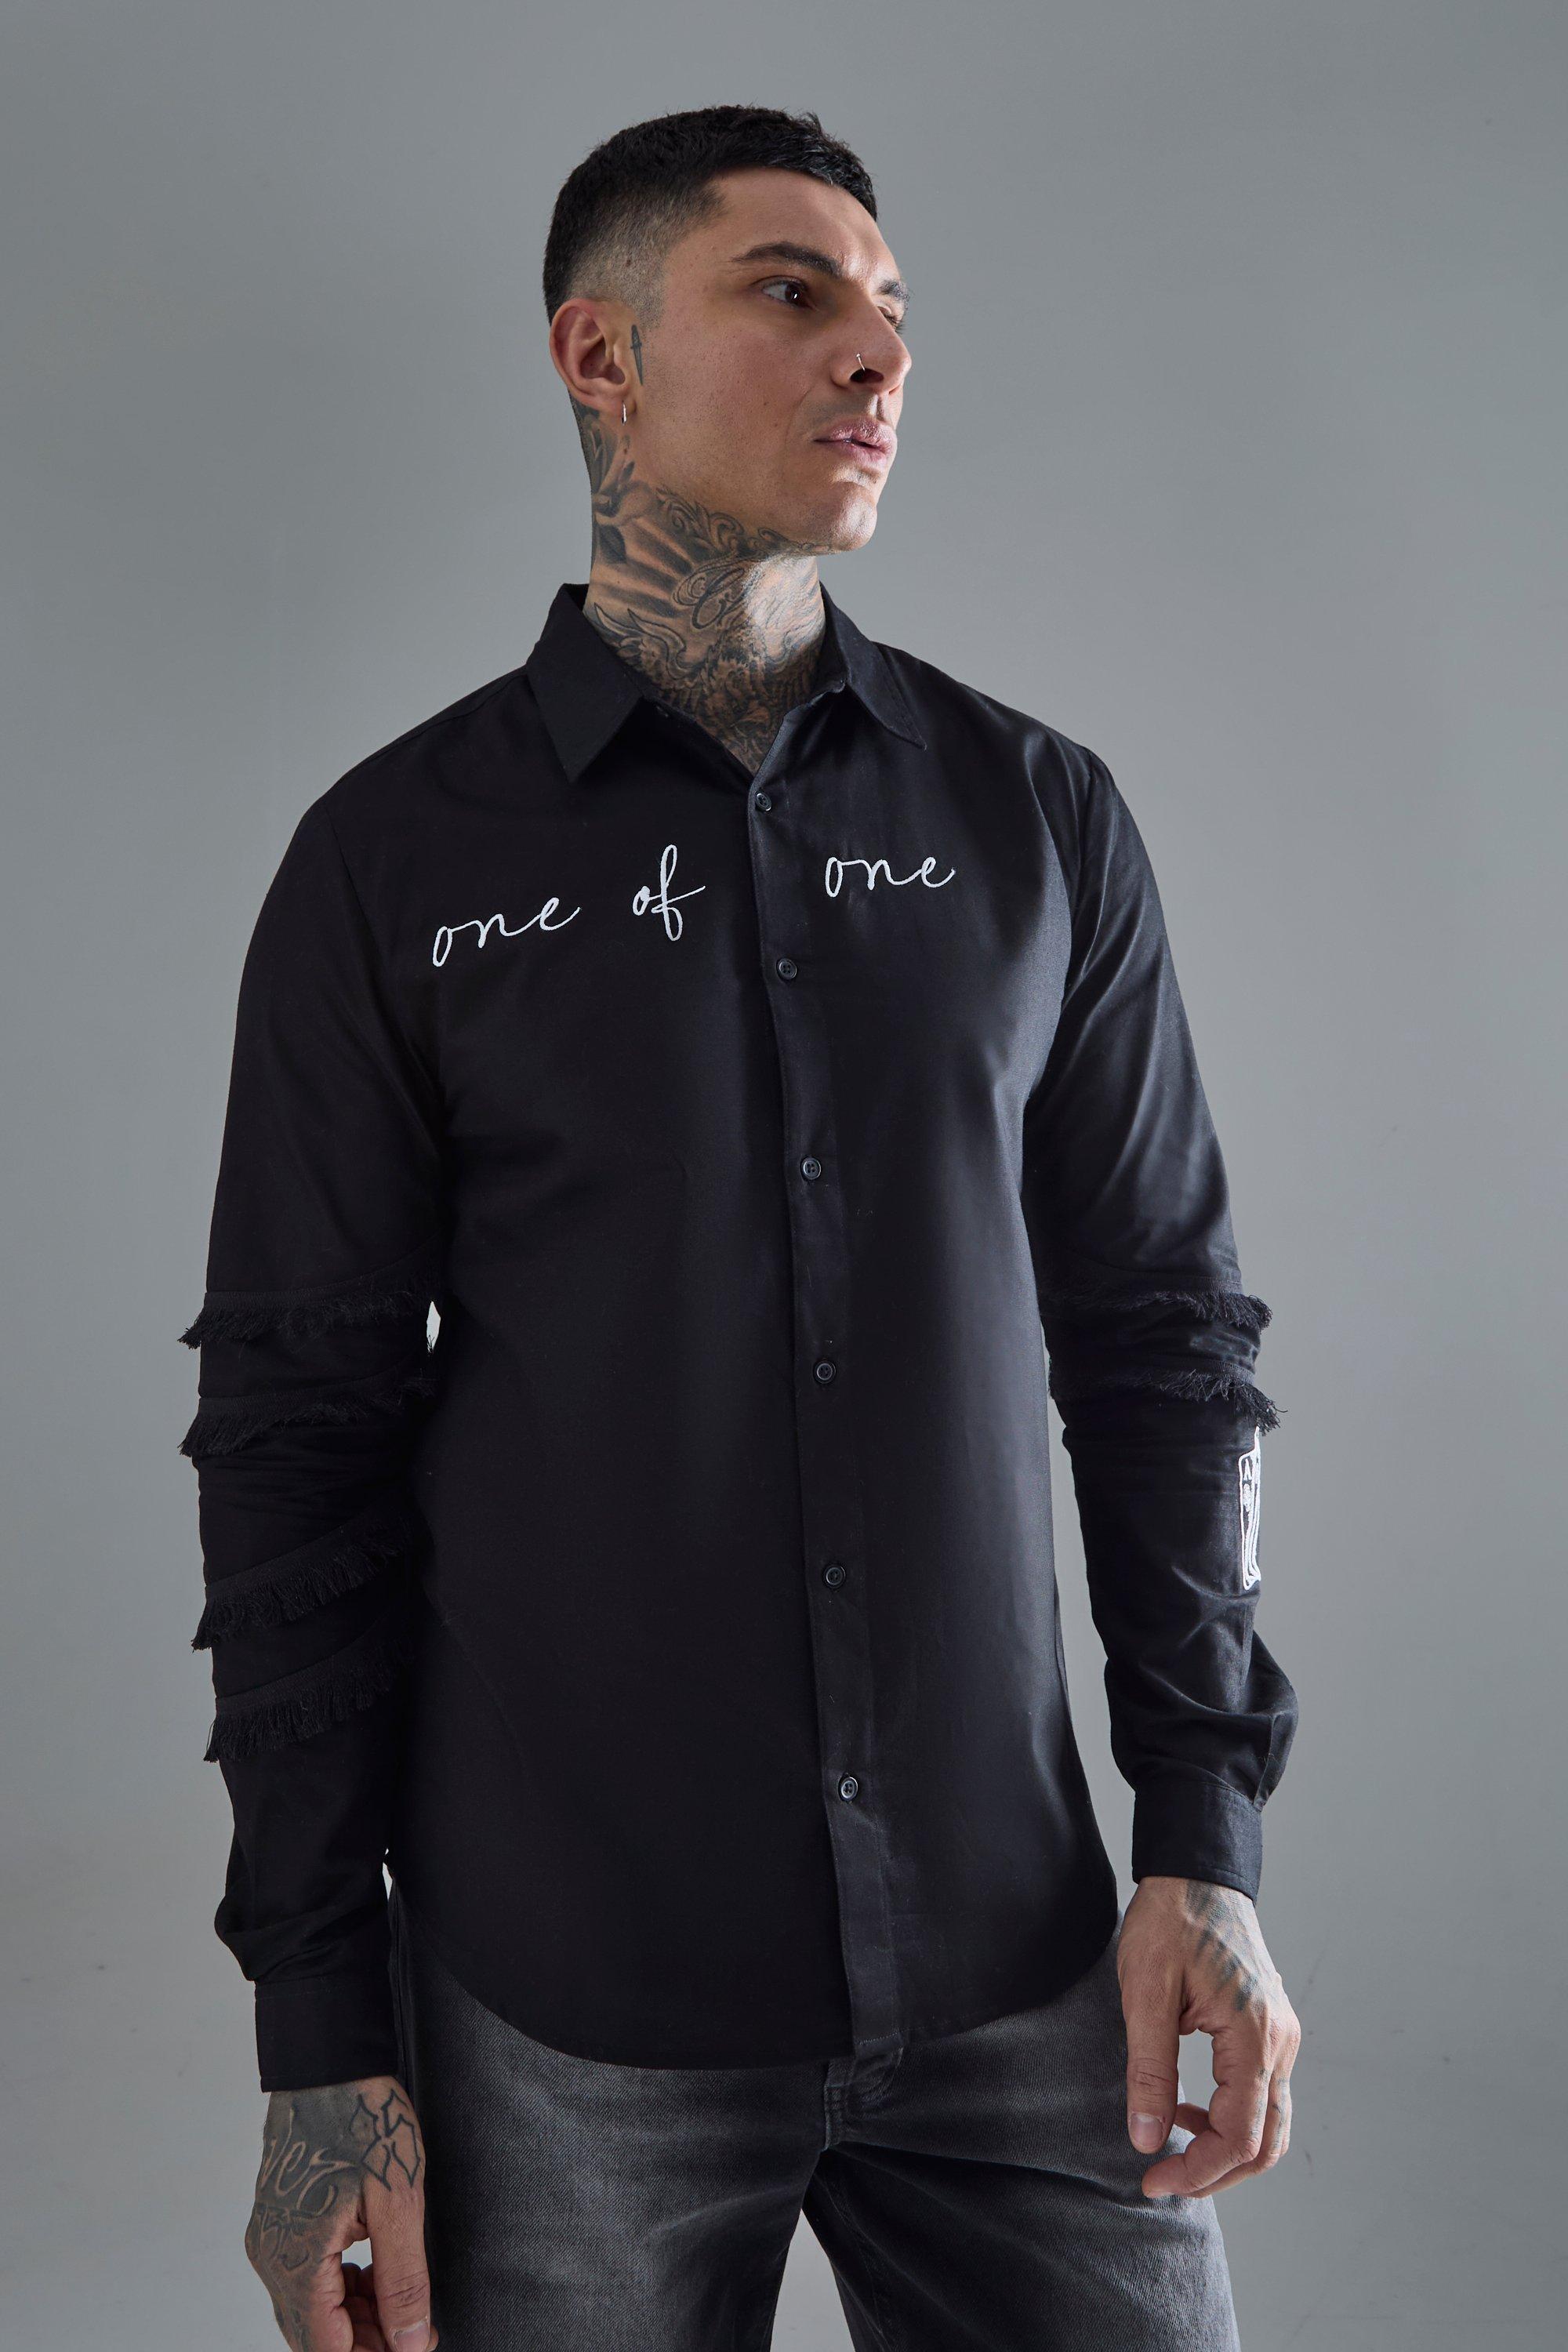 Mens Black Tall Longsleeve One Of One Embroidered Shirt, Black